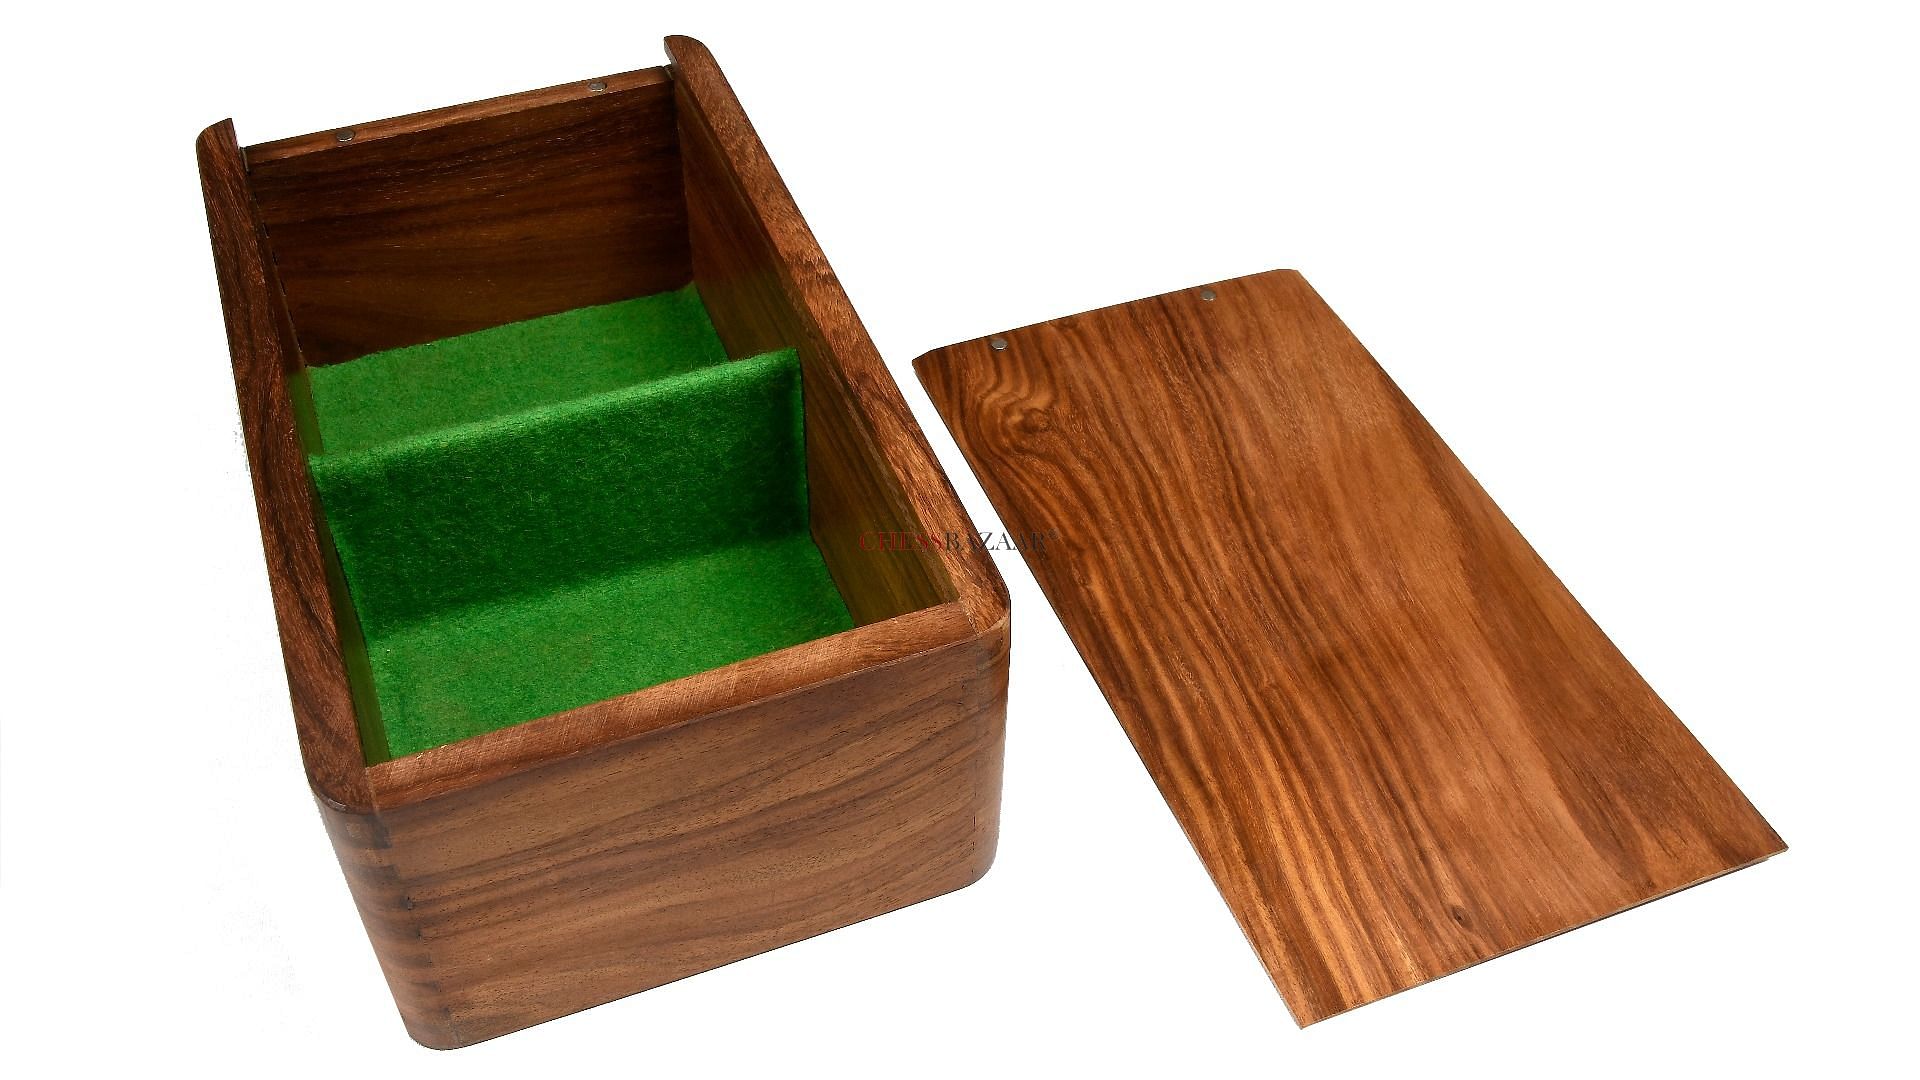 Wooden chess storage box having partition in it